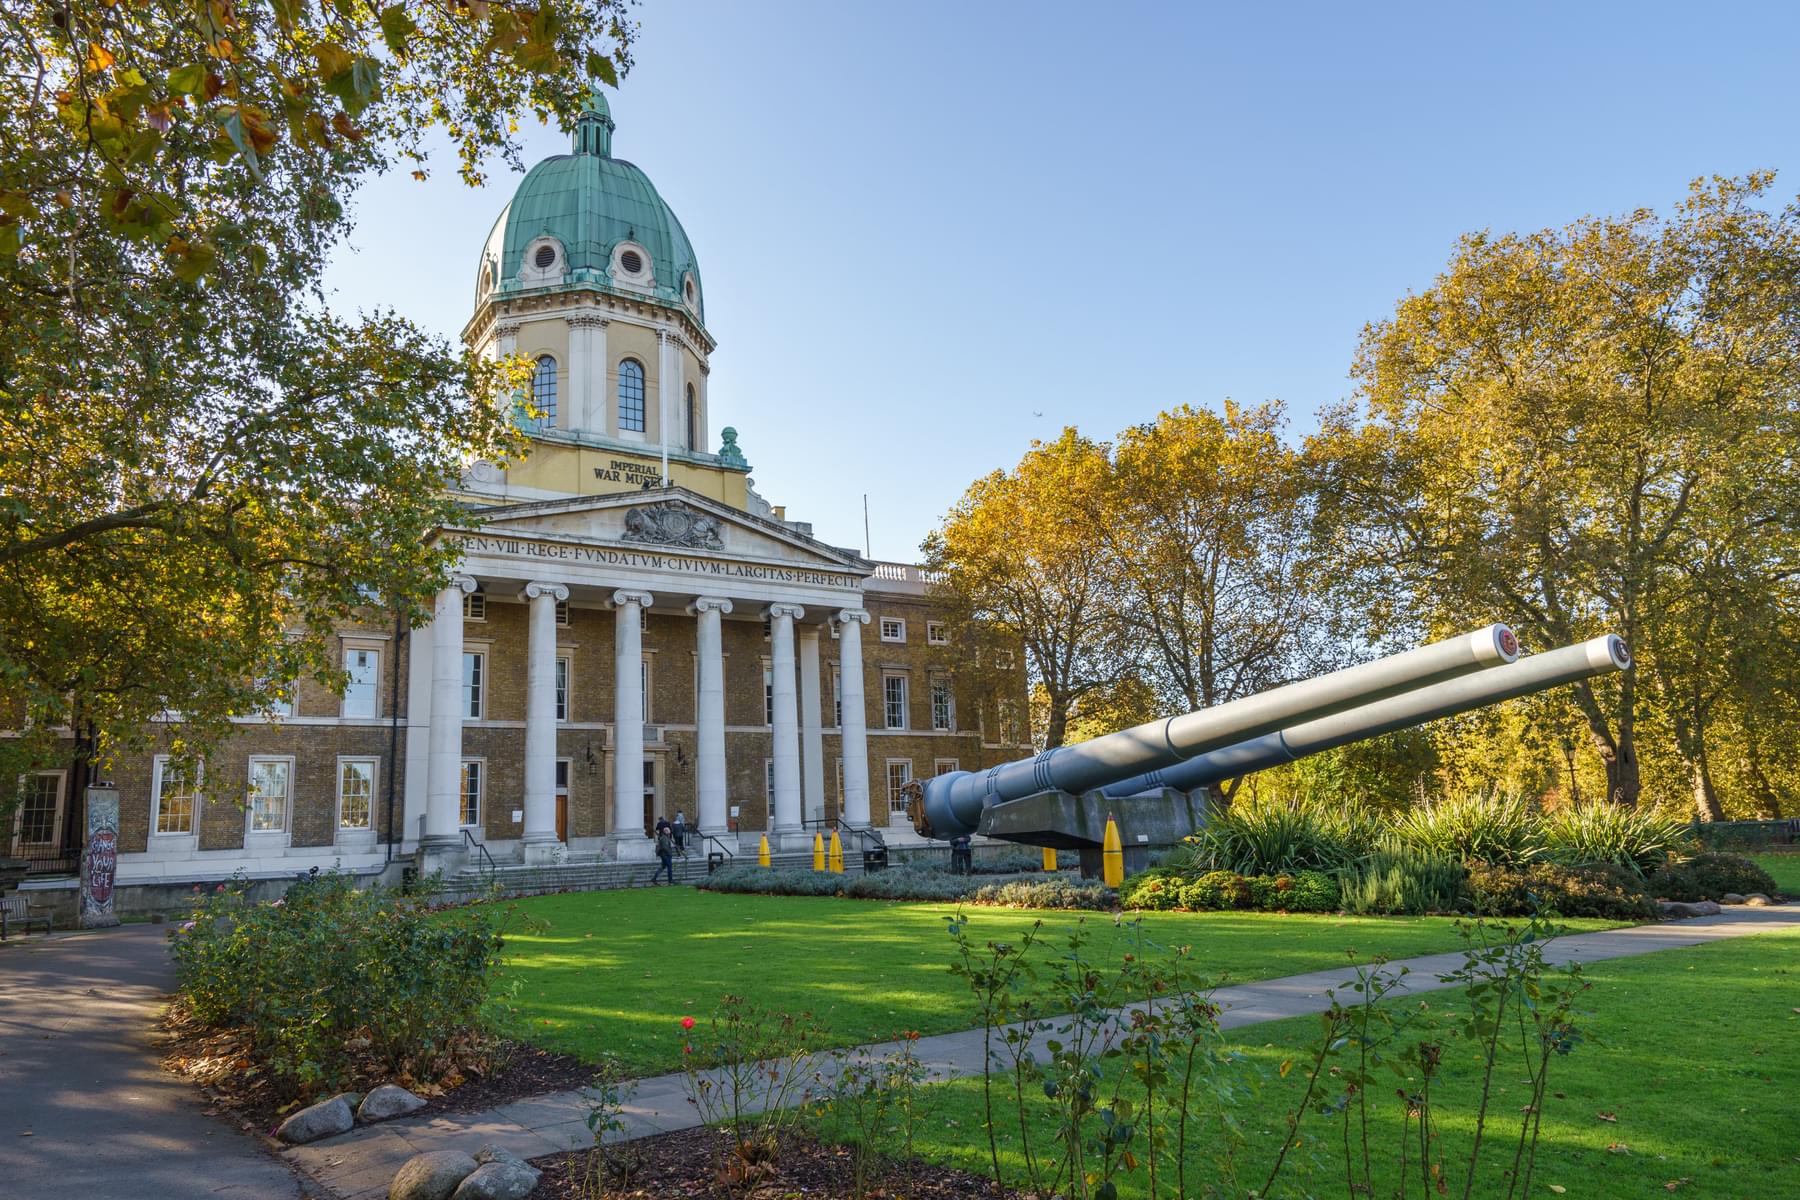 Tips To Visit The Imperial War Museum